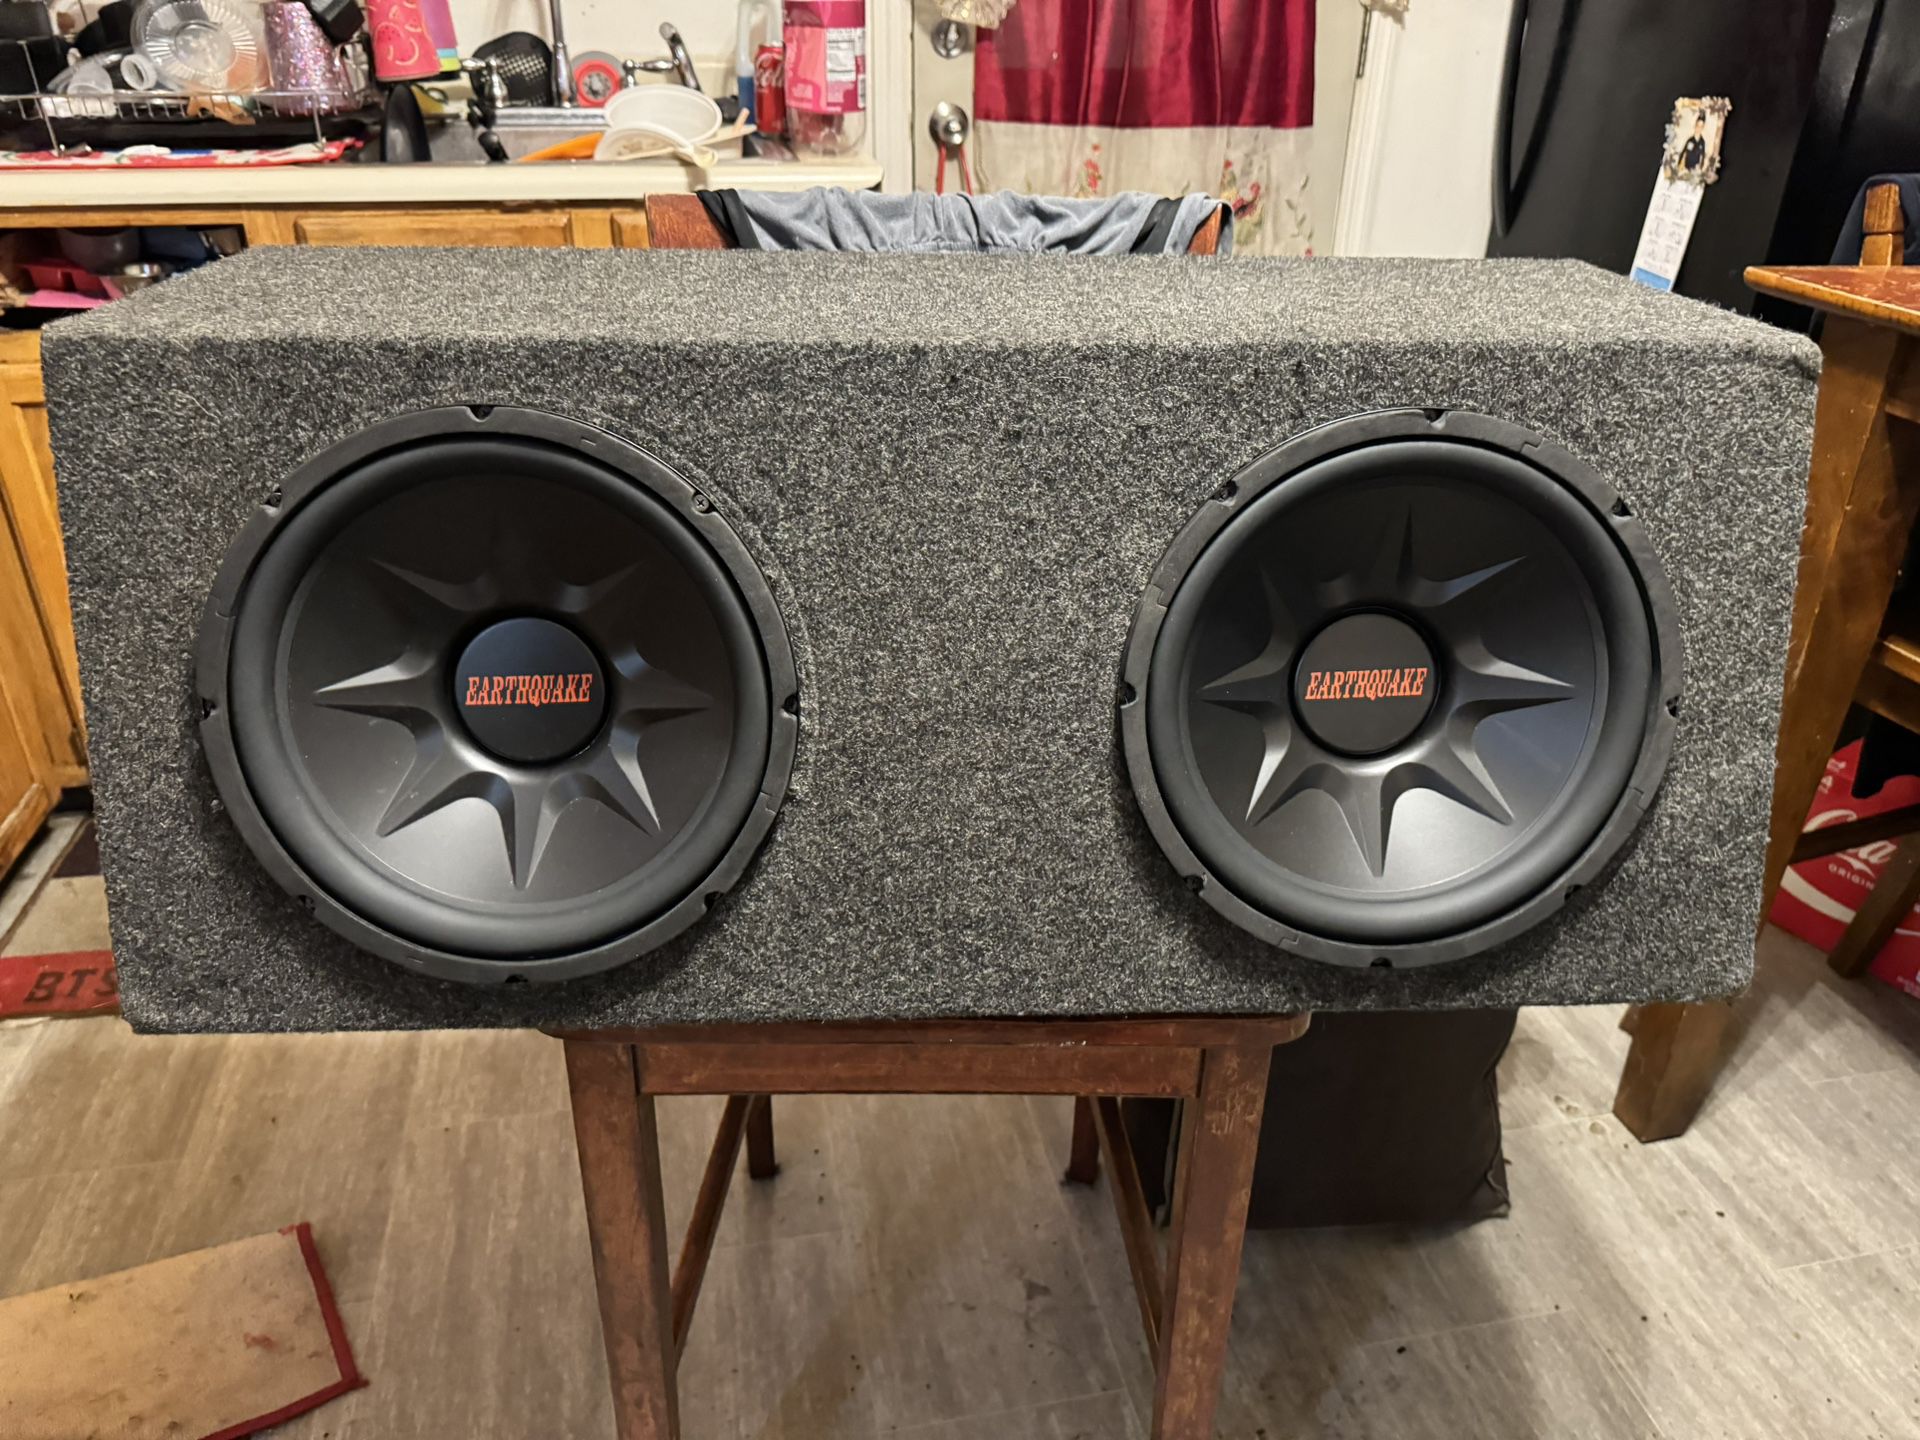 Must hear 2 12"Earthquake Subs in box No amp can demo Subs like new 